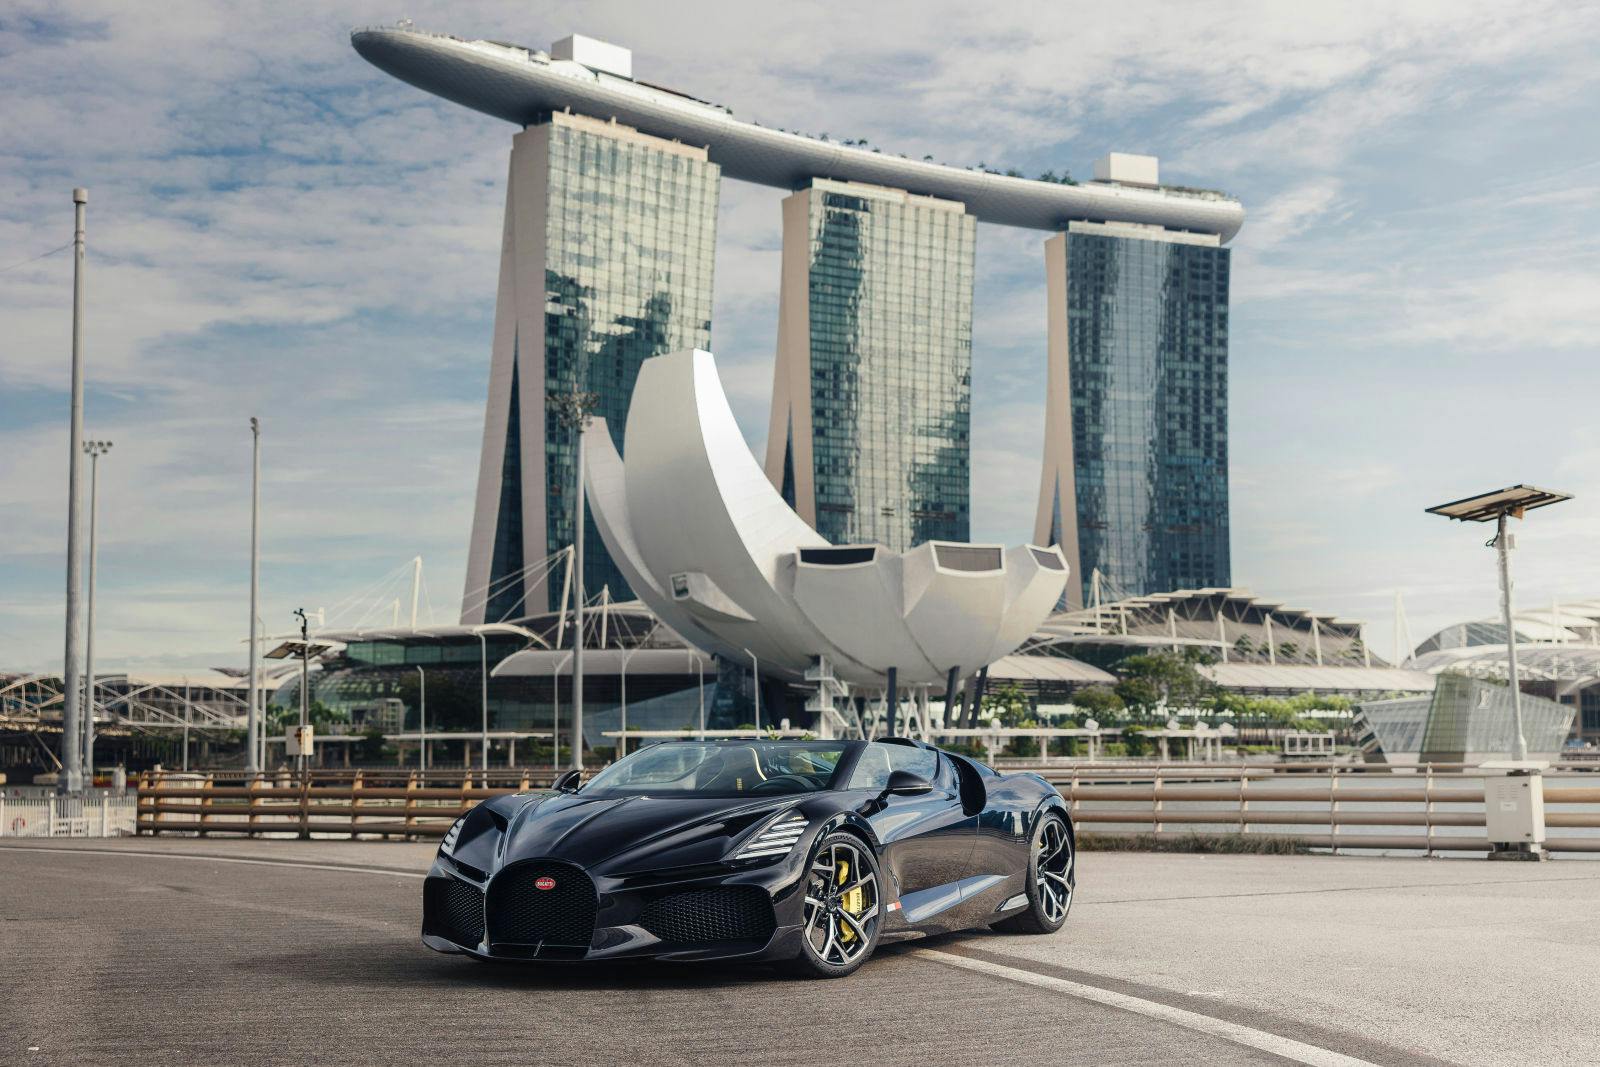 While in Singapore, the Bugatti W16 Mistral stopped at the not-to-be-missed Marina Bay Waterfront.